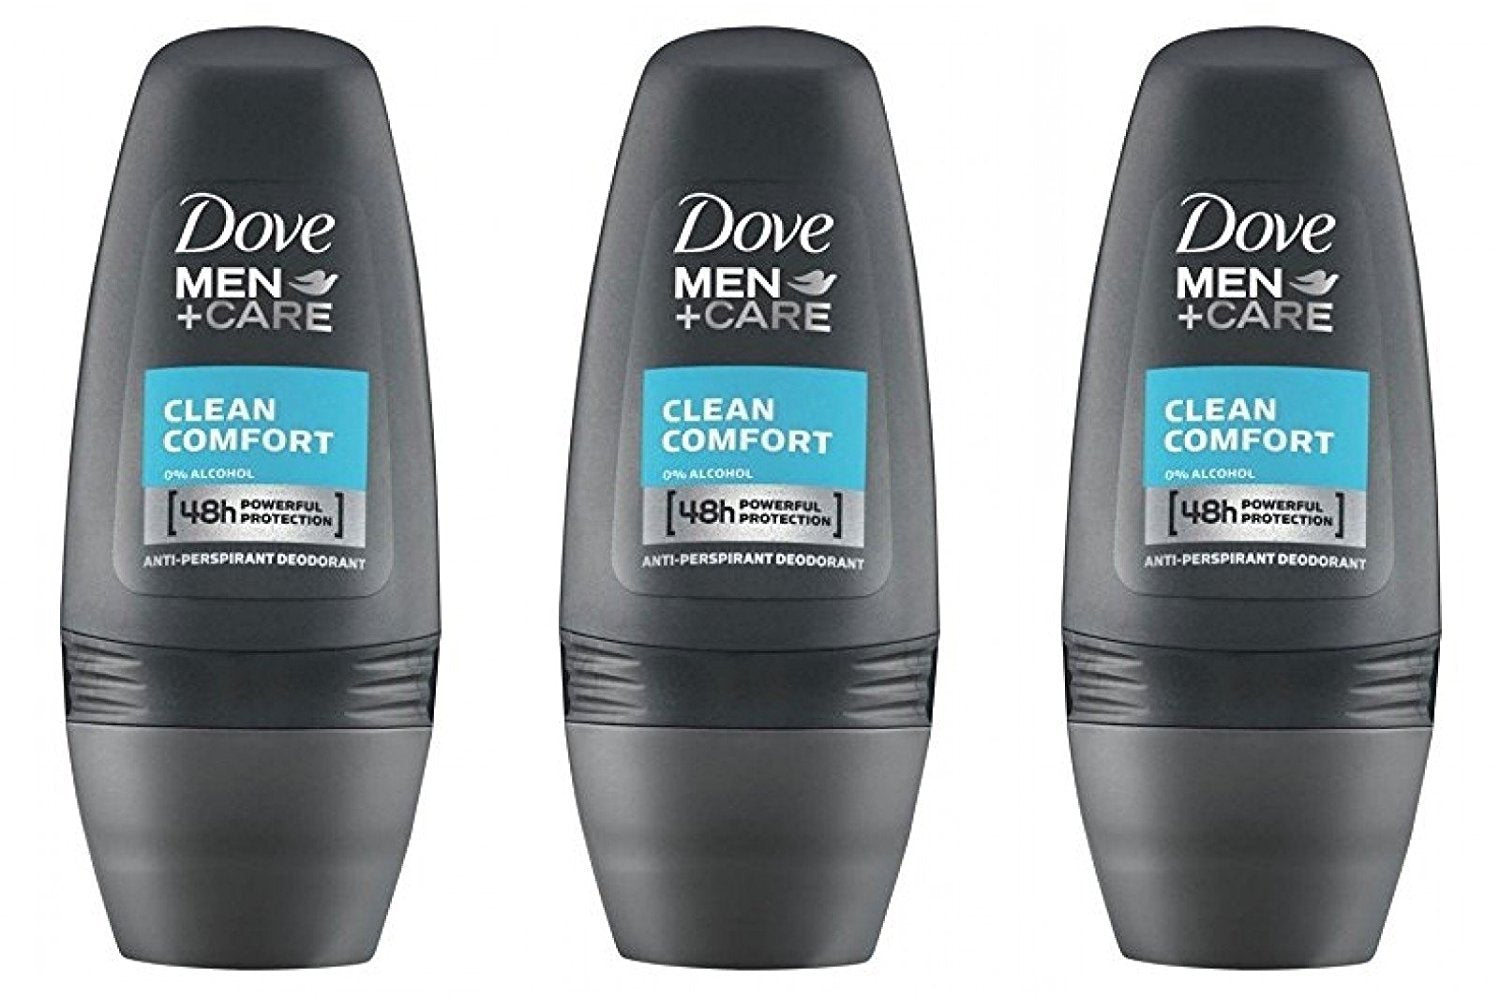 Dove Men Clean Comfort Anti-Perspirant Deodorant Roll-On 50ml (1.7 Fluid Ounce). (Pack Of 3)